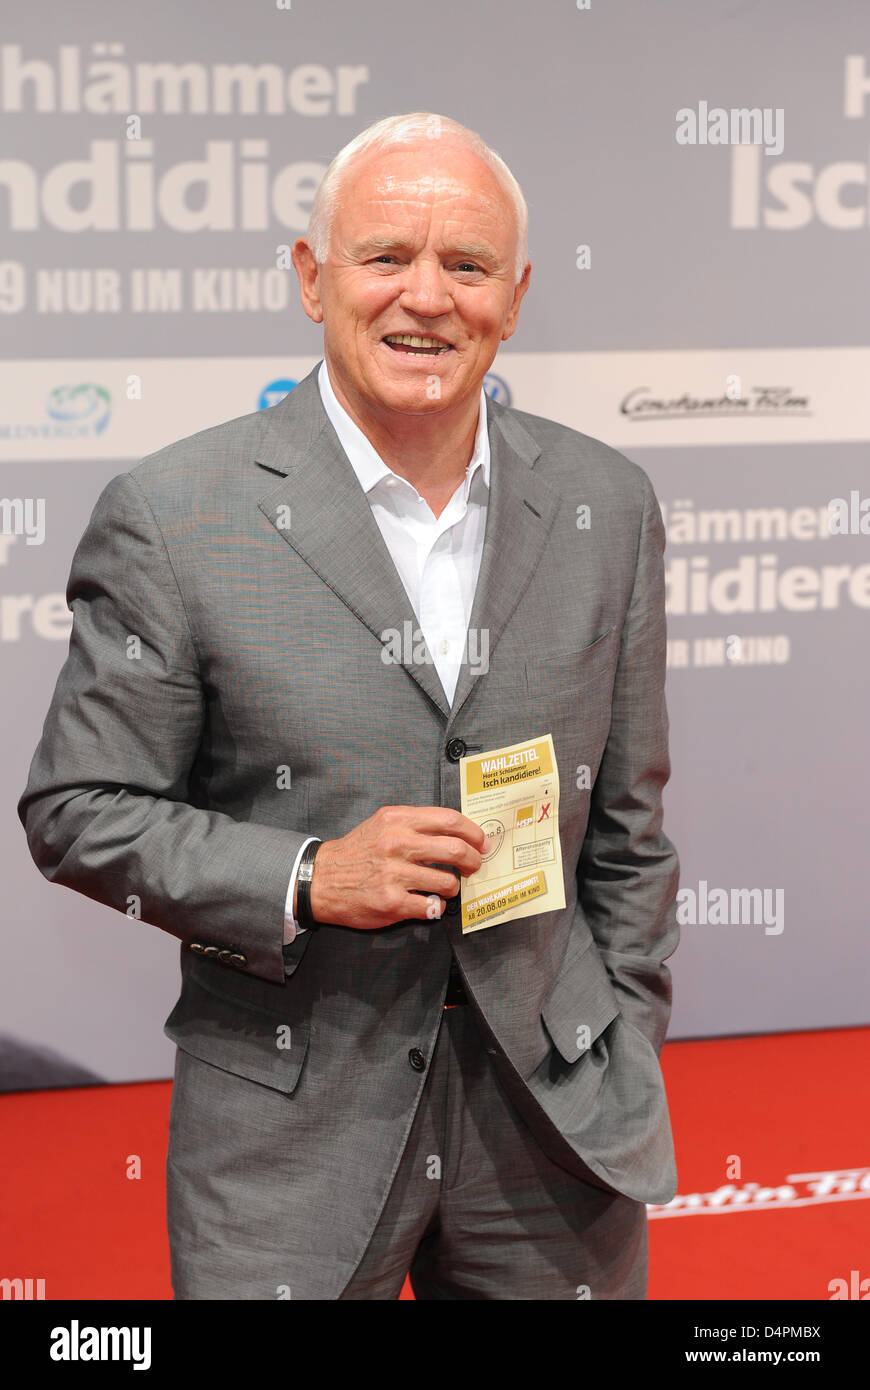 Werner Baldessarini, former Boss CEO, arrives for the premiere of the film  ?Horst Schlaemmer - Isch kandidiere!? in Berlin, Germany, 17 August 2009.  The film portrays Horst Schlaemmer mock-running for Chancellor and